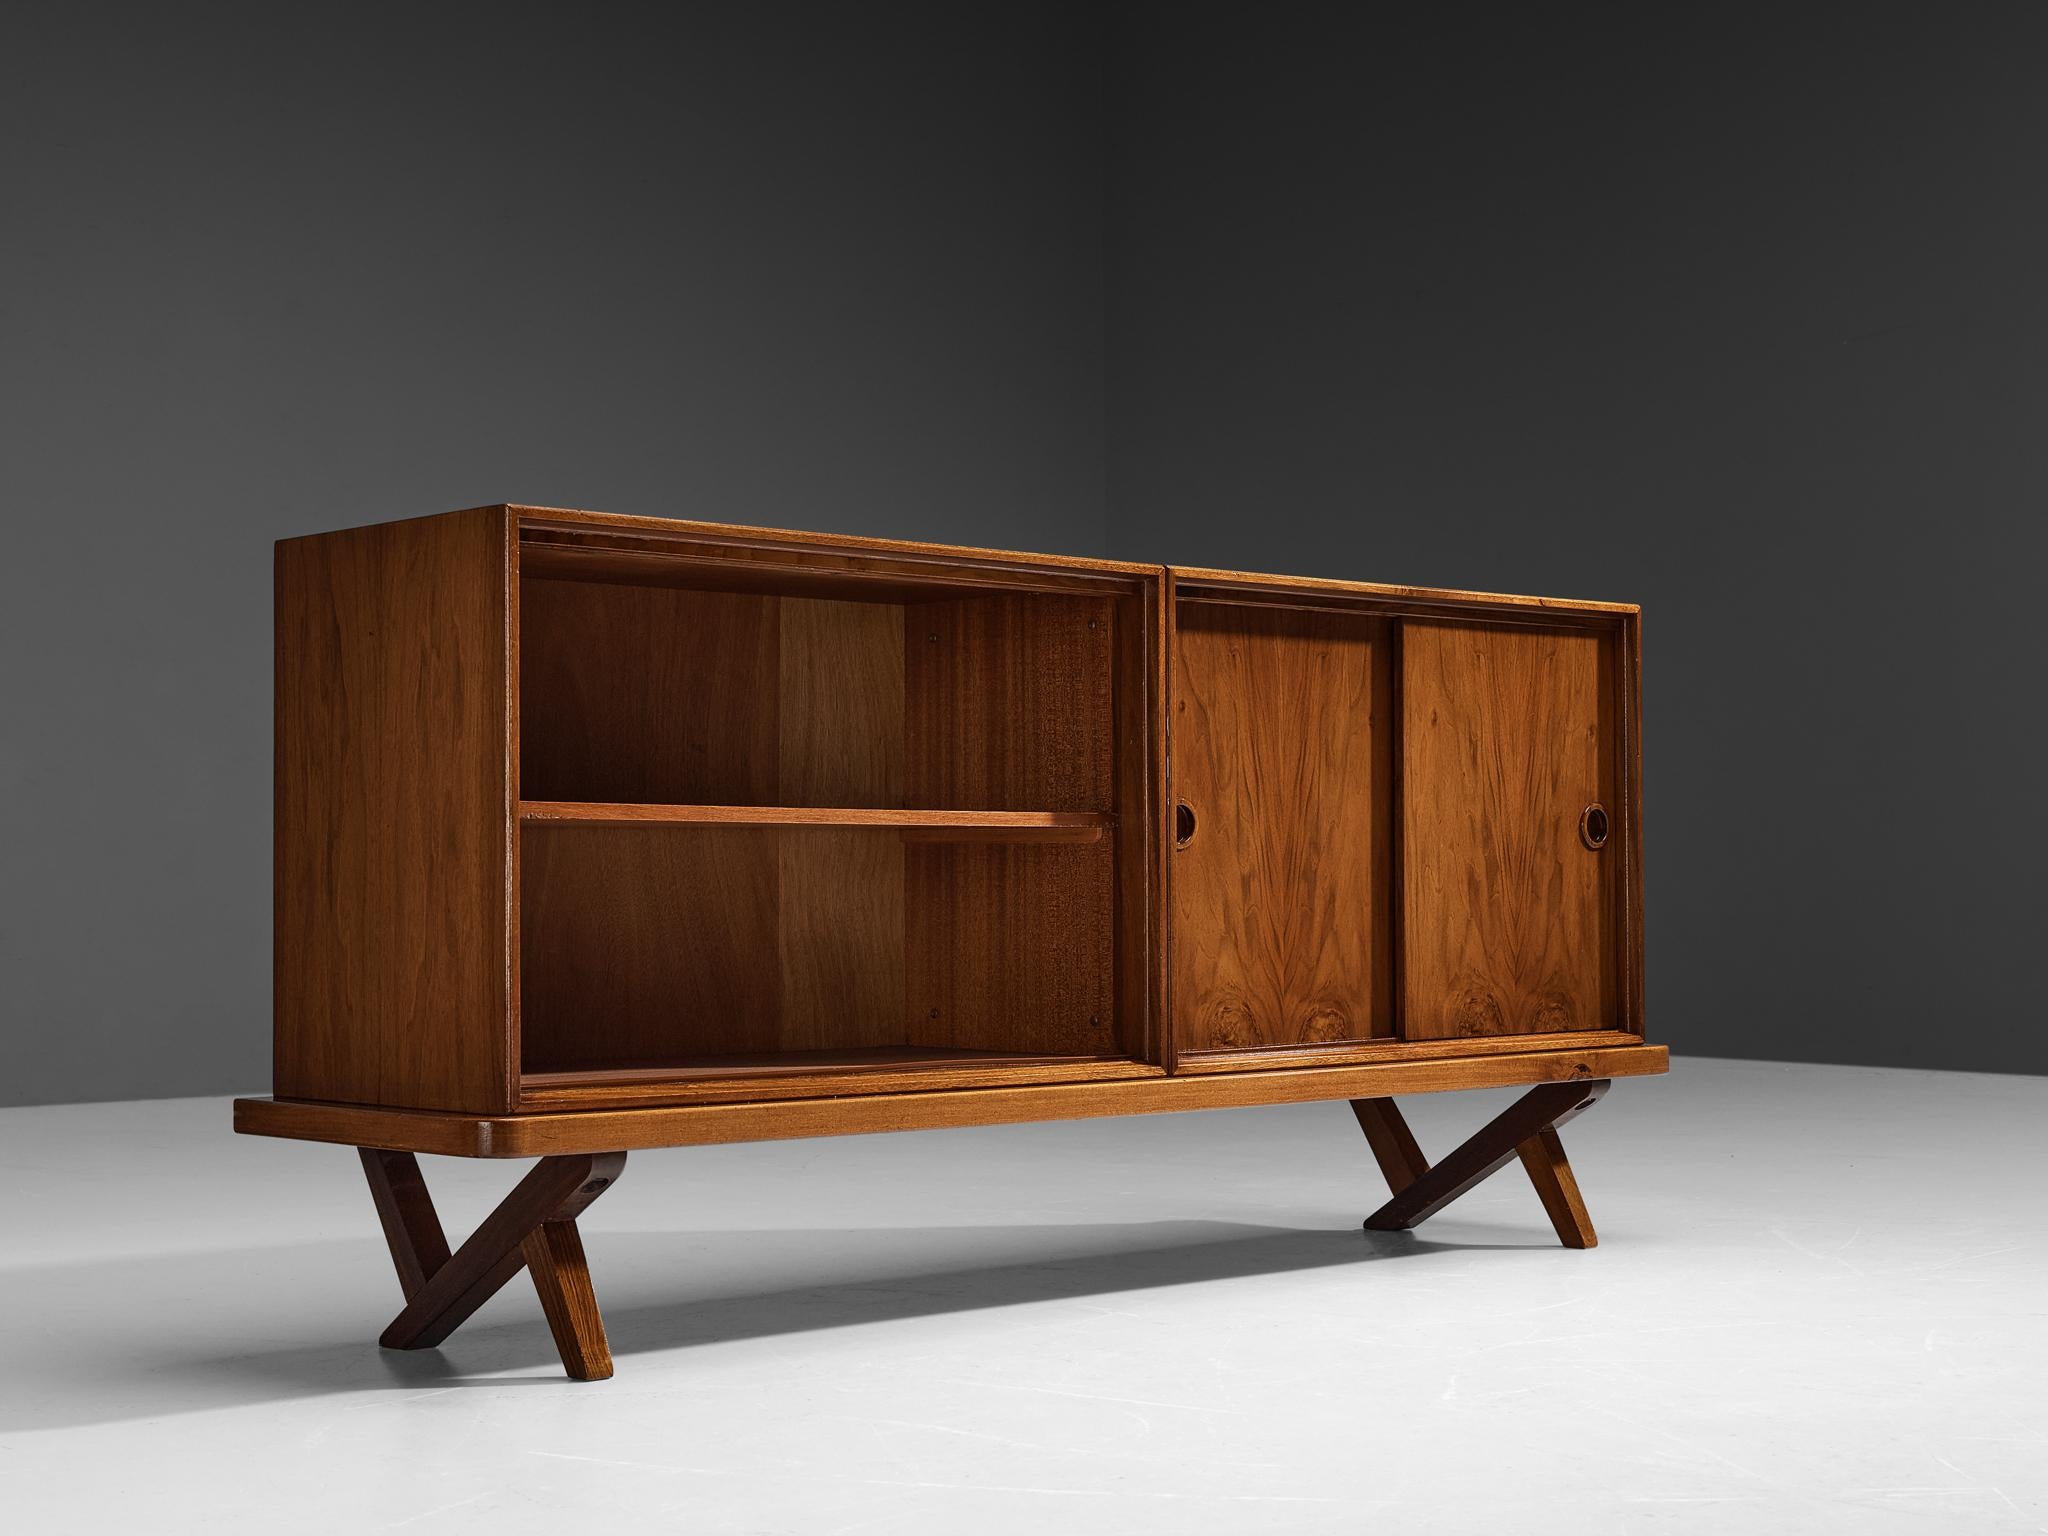 Rudolf Bernd Glatzel for Fristho, sideboard, walnut, The Netherlands, 1955.

This beautifully designed piece by Rudolf Bernd Glatzel for Fristho holds incredibly high qualities that are discernible in the construction. The whole corpus is executed